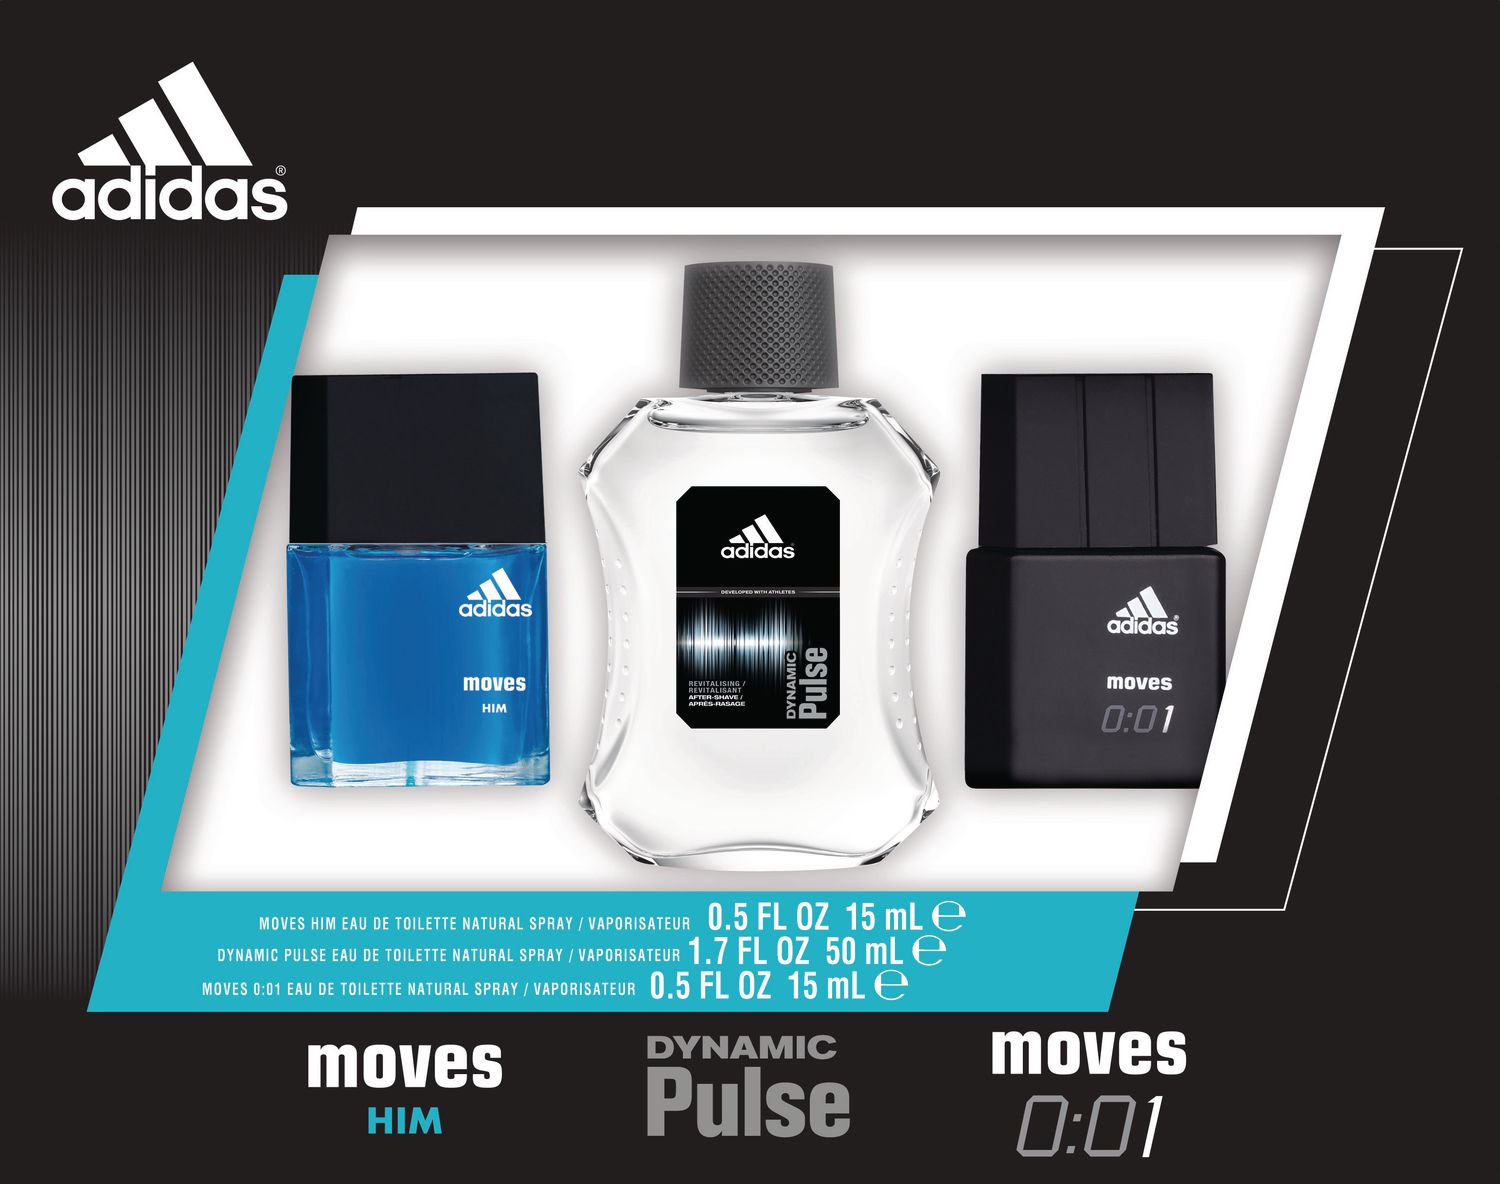 adidas moves him in store